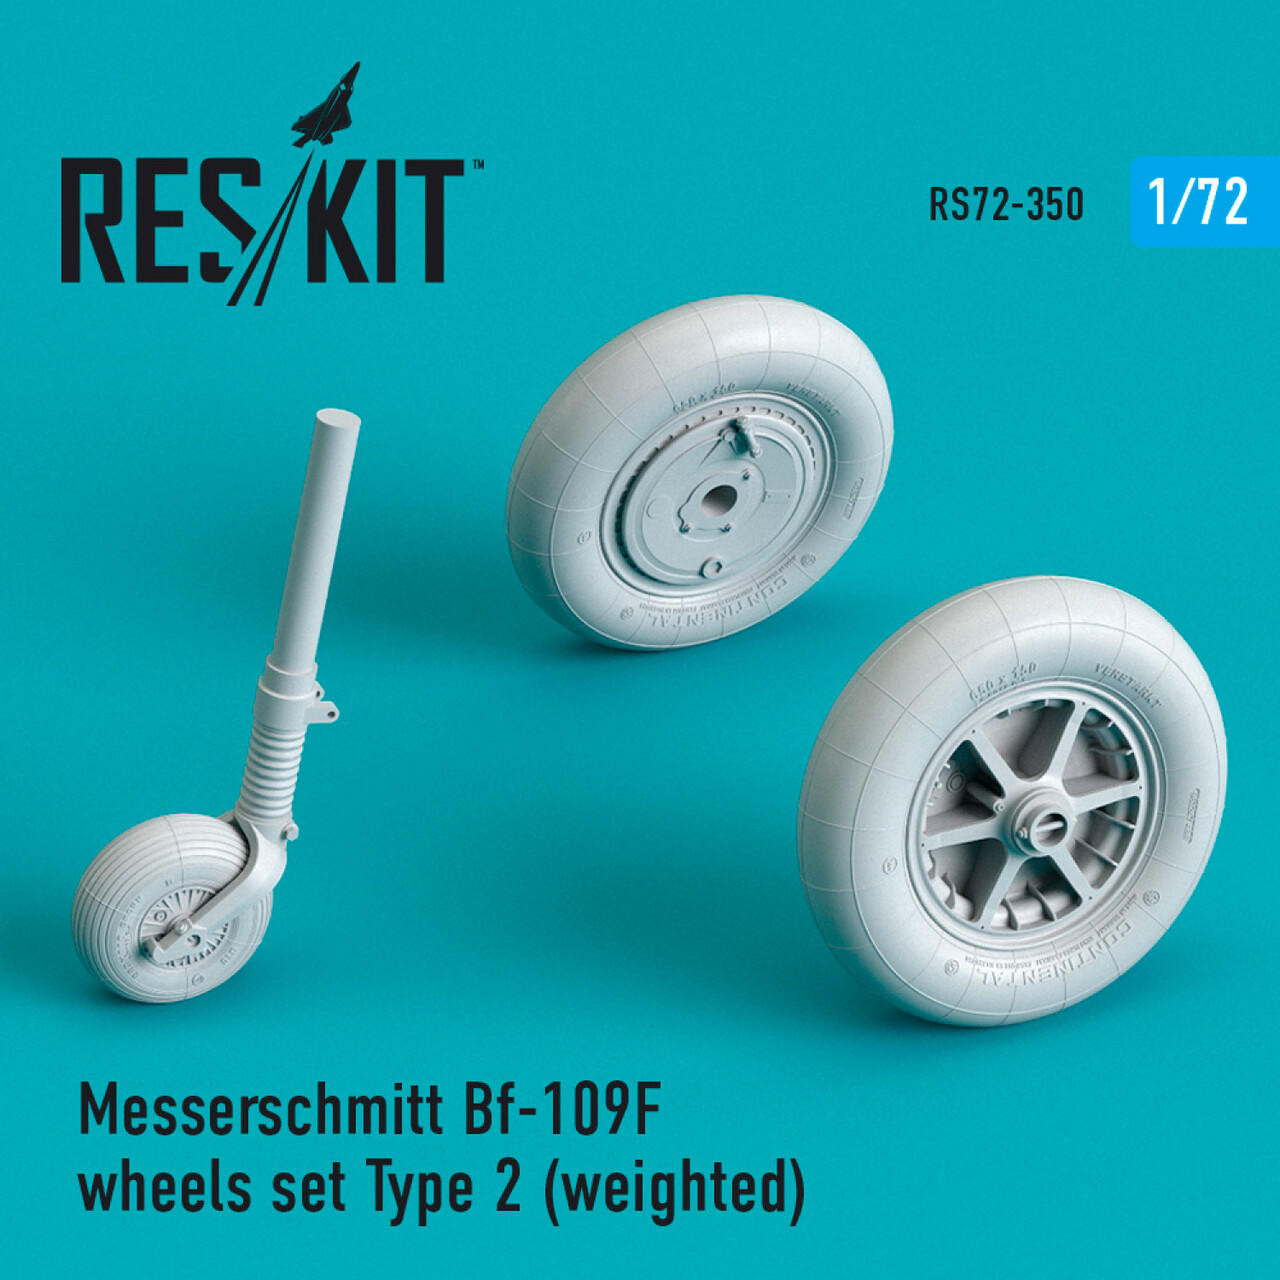 RES-RS72-0350 1/72 Reskit Messerschmitt Bf-109F G Early wheels set Type 2 weighted 1/72 MMD Squadron